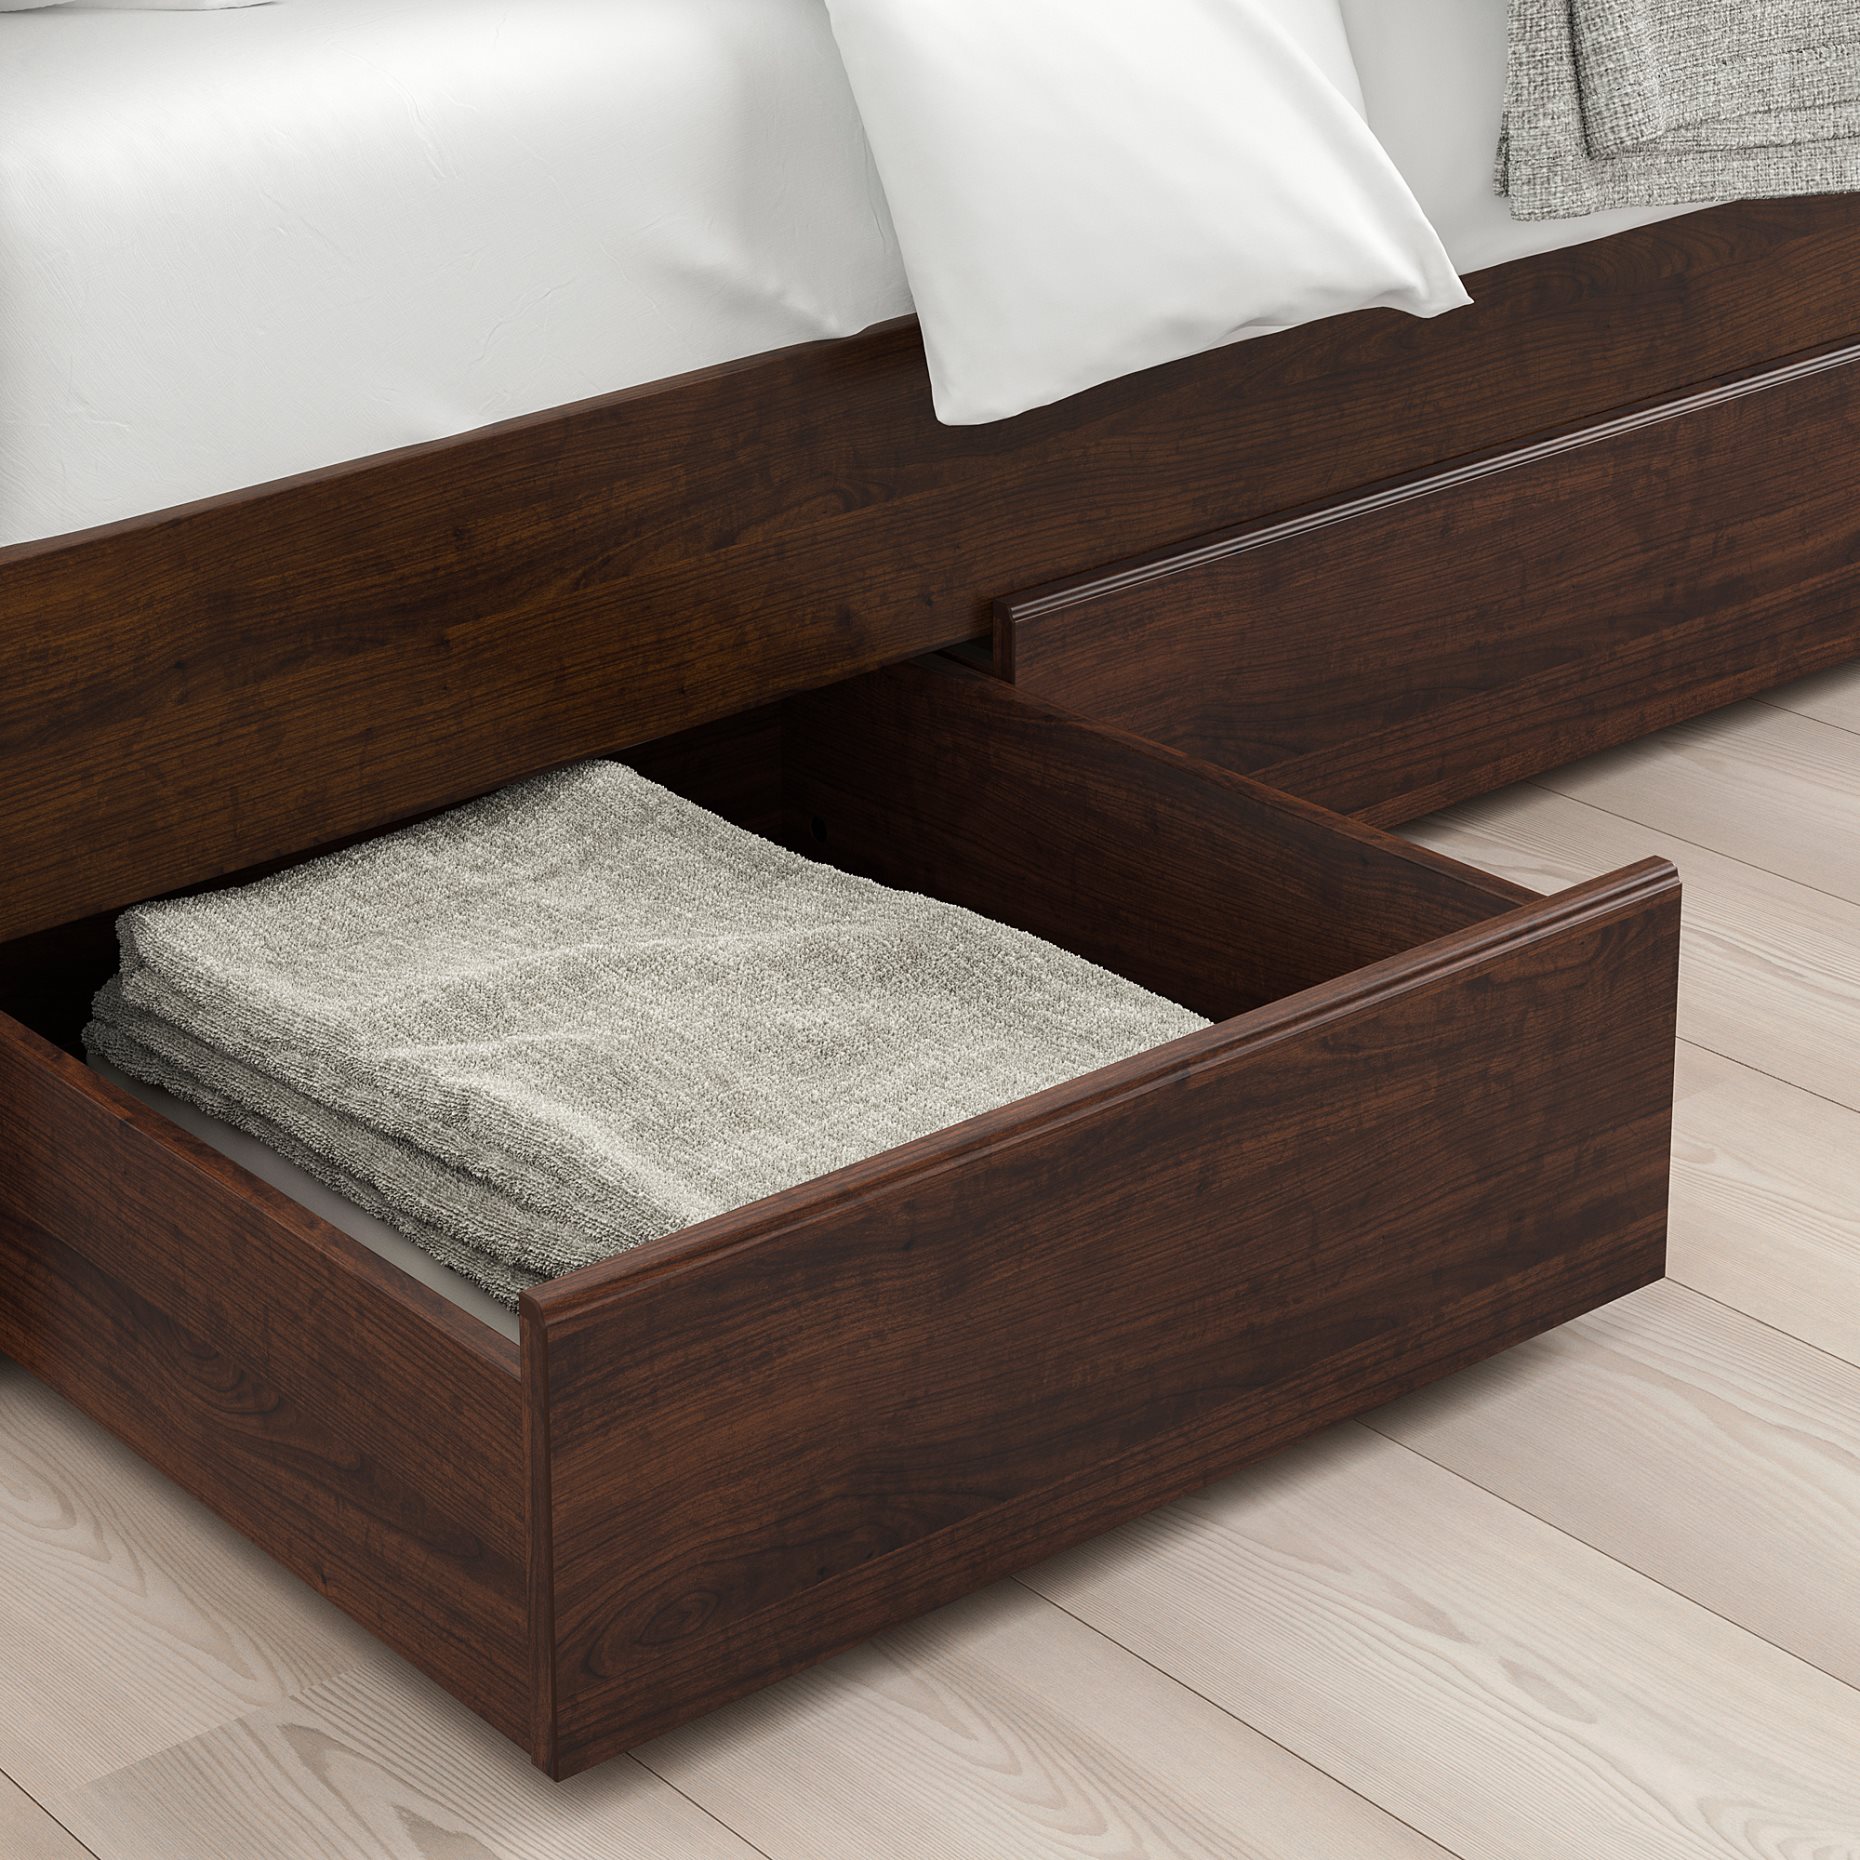 SONGESAND, bed frame with 4 storage boxes, 160X200 cm, 992.411.66